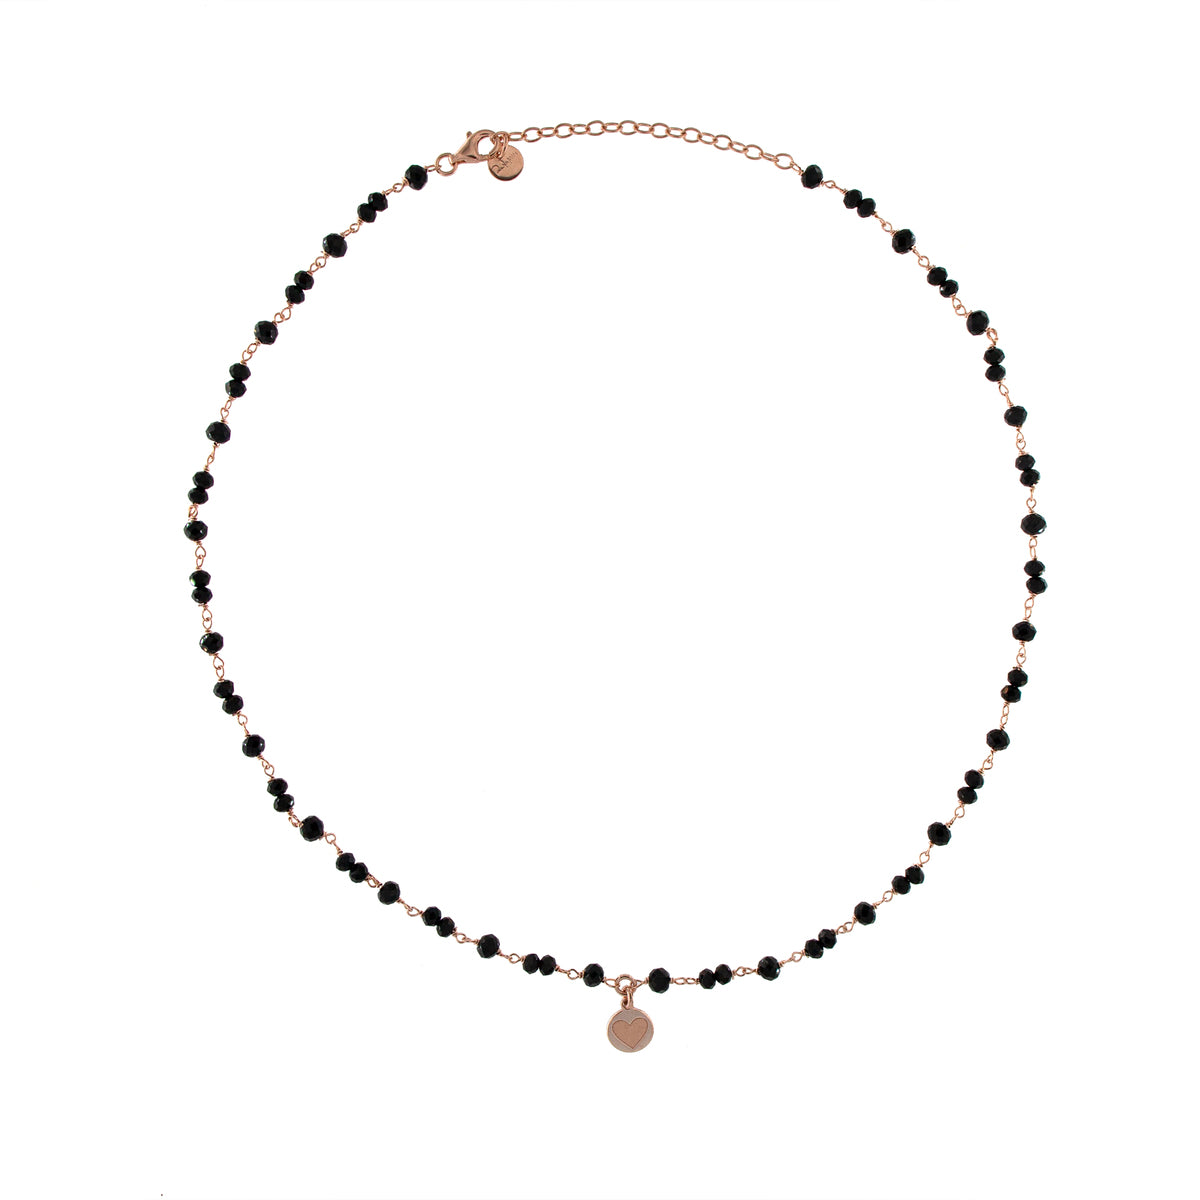 Chokers - CHAINED STONES NECKLACE - GIPSY TIERRA BLACK - 1 | Rue des Mille